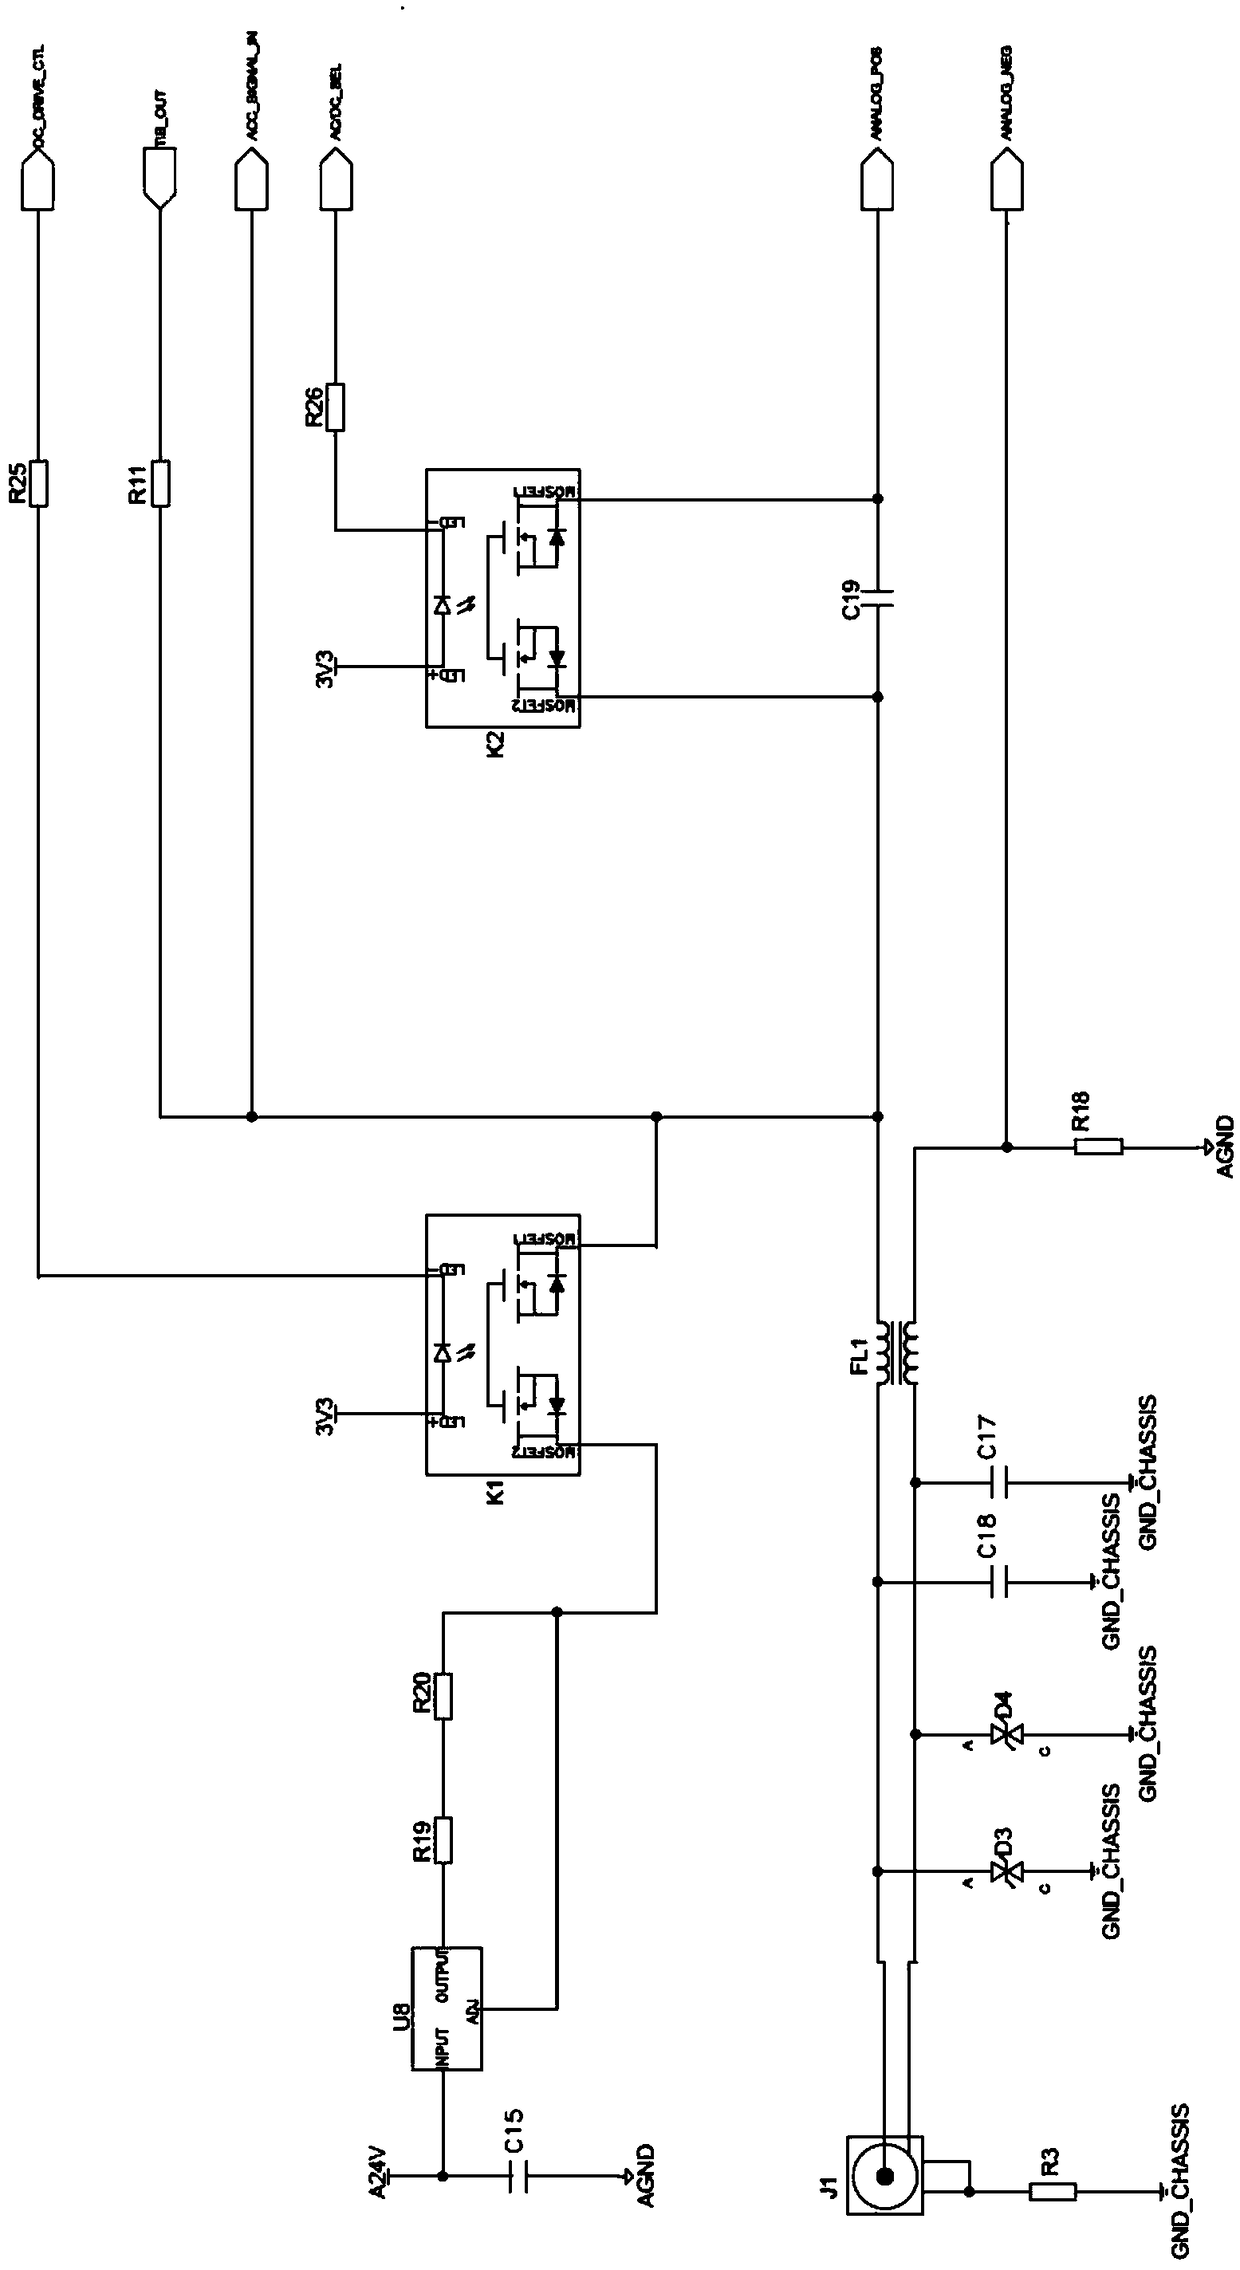 Fully Differential Signal Conditioning Circuit for Current Excited Sensors